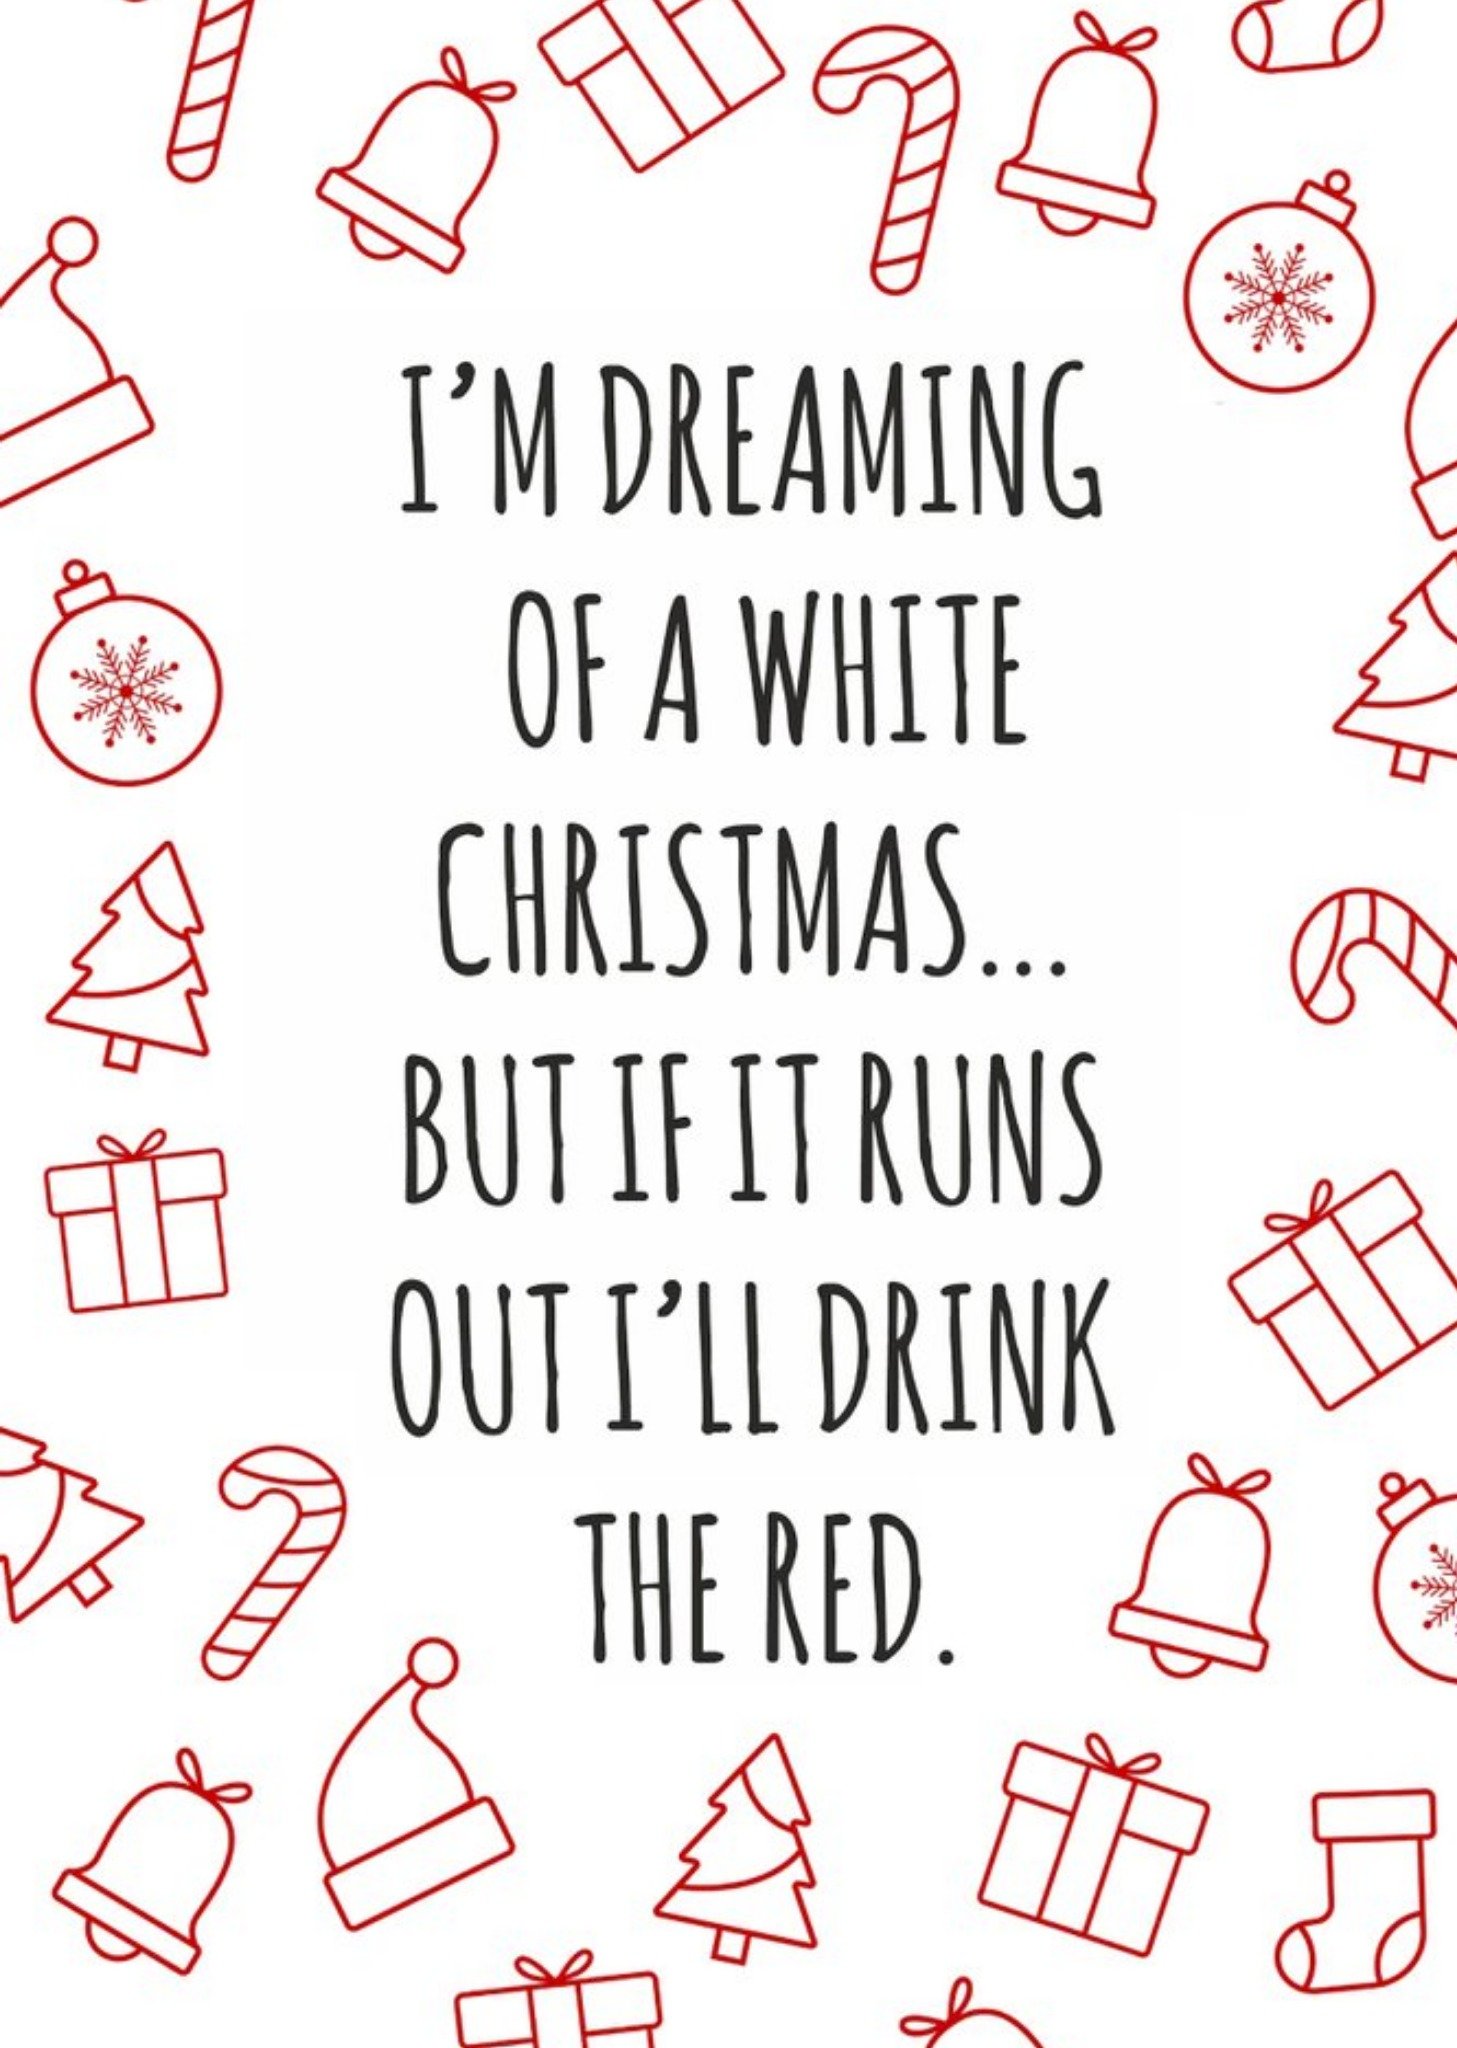 Banter King Funny I'm Dreaming Of A White Christmas Card Ecard